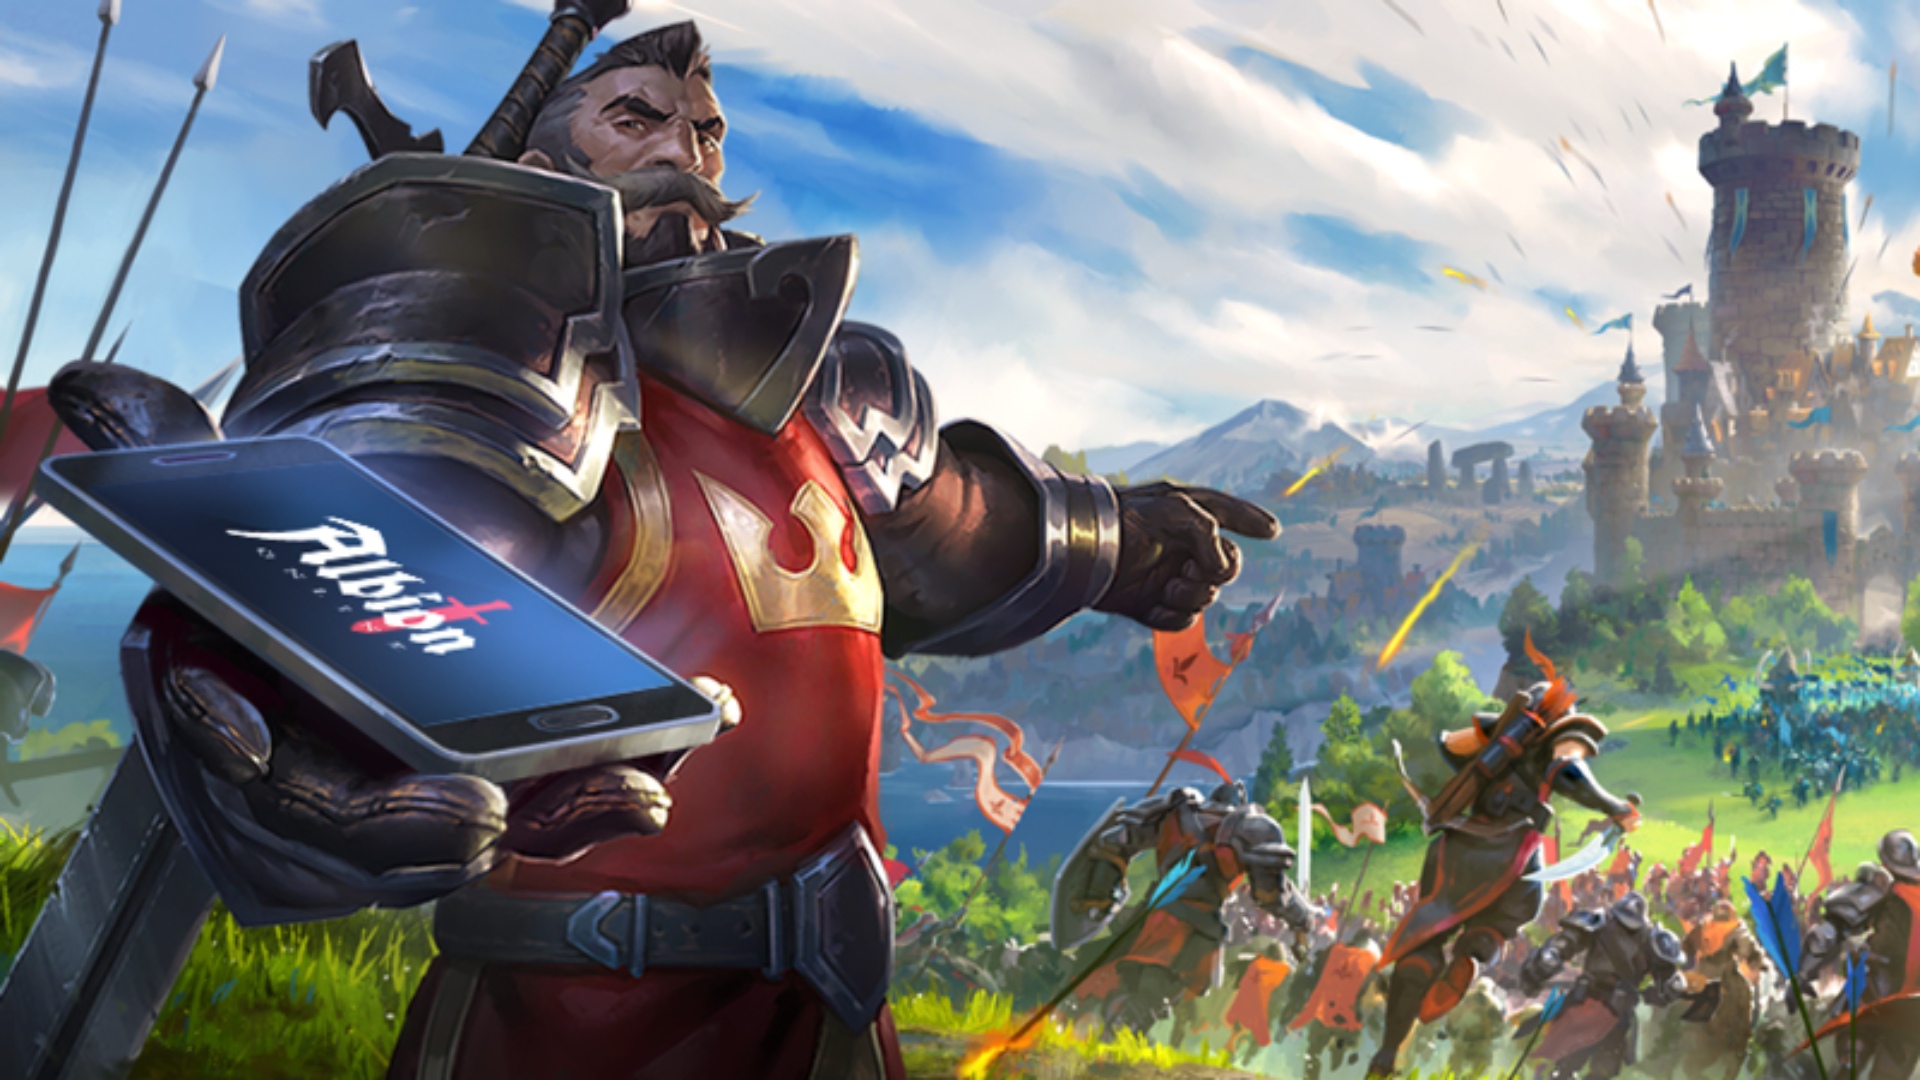 Albion Online - Lands Awakened Patch 4 is Here 